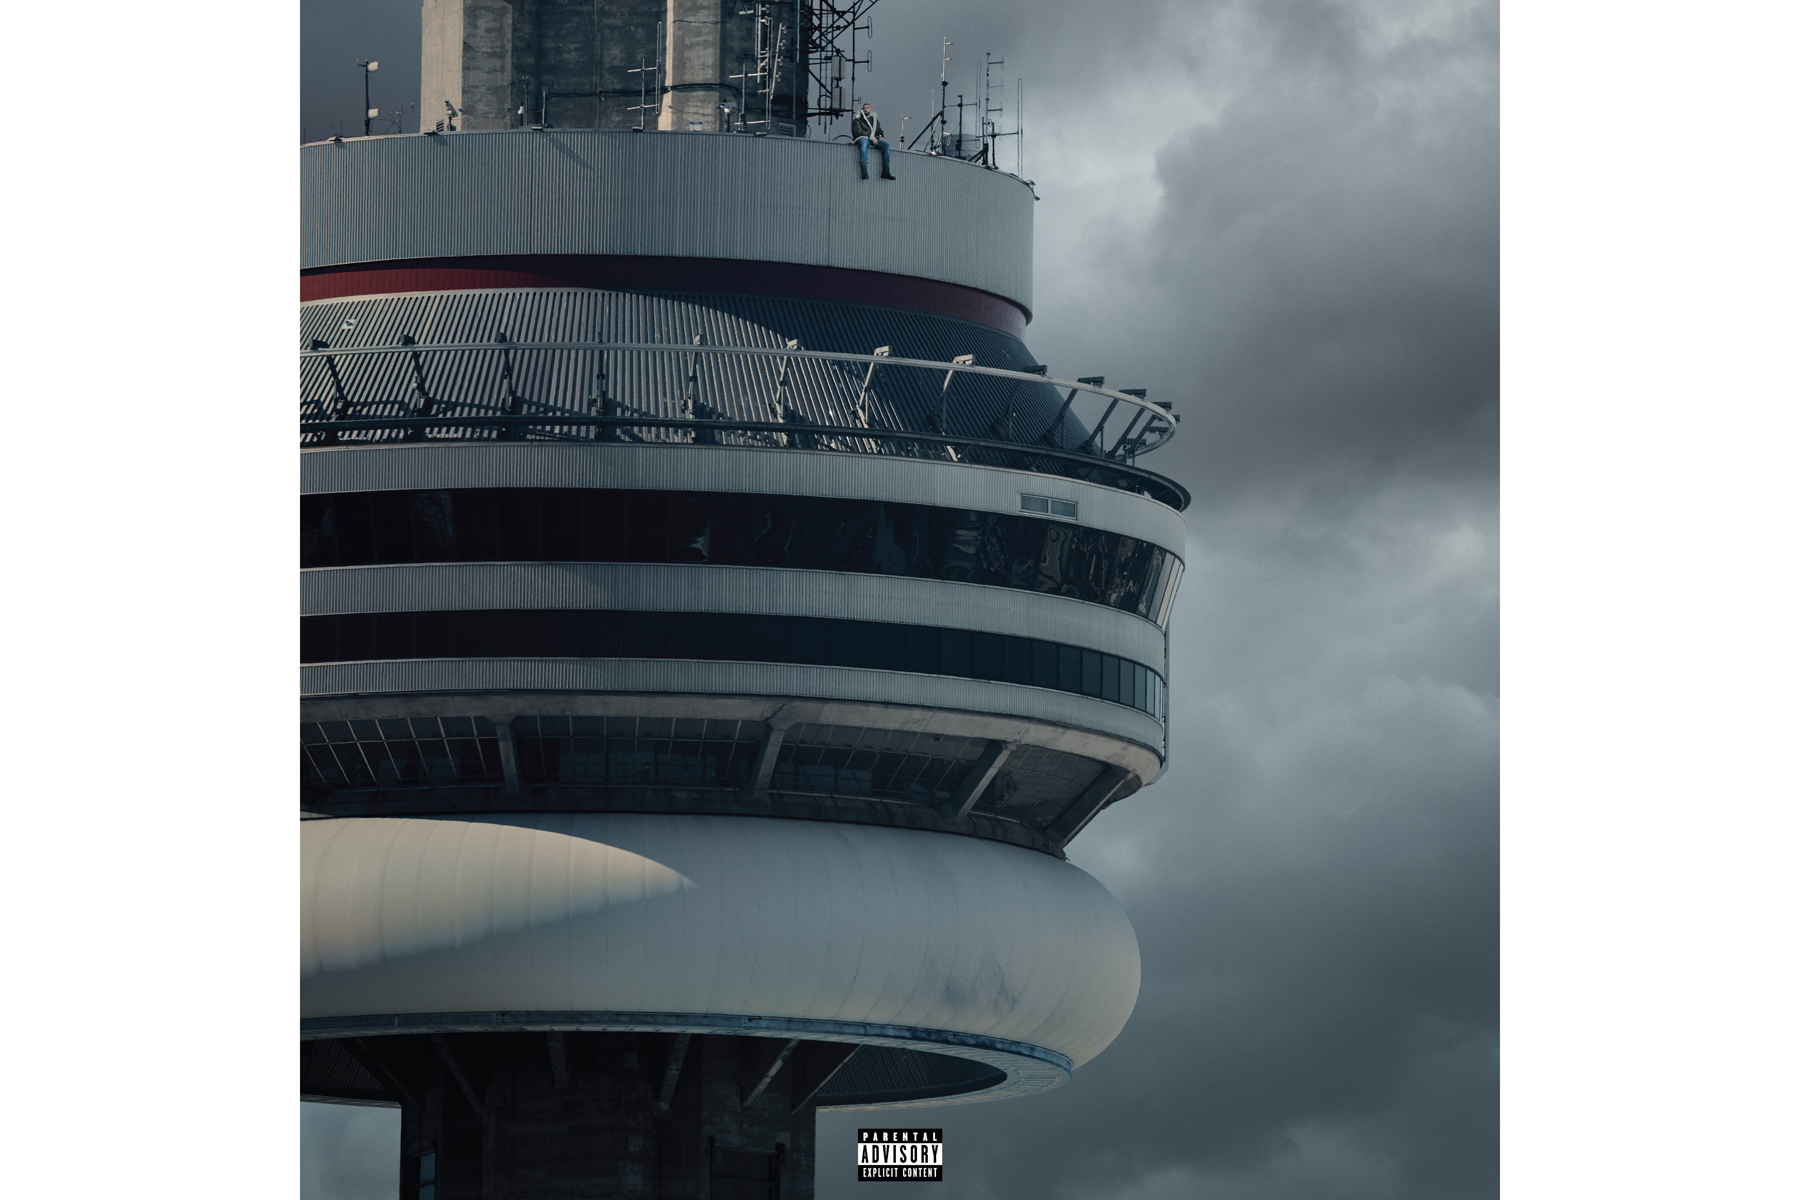 views from the 6 album list of songs